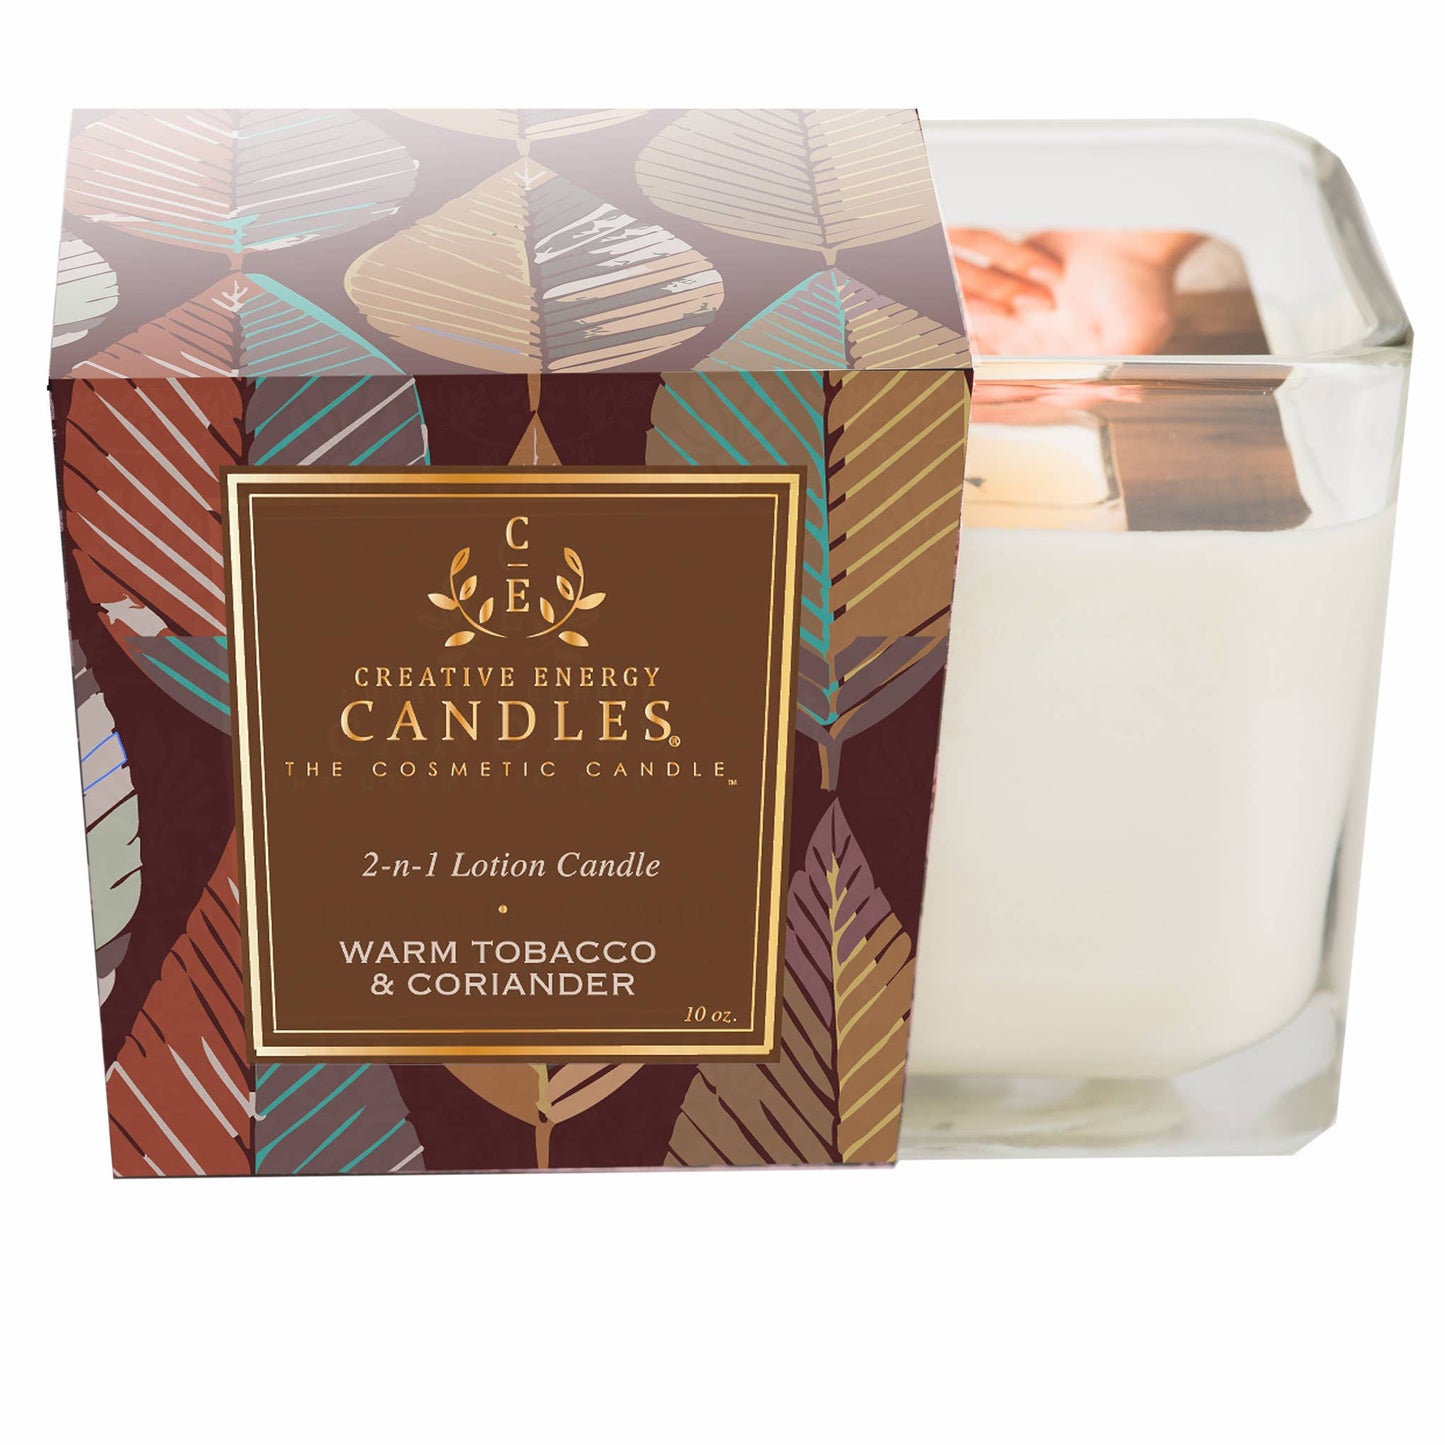 Creative Energy Candles - Warm Tobacco & Coriander: 2-in-1 Soy Lotion Candle: Tester - 6 oz